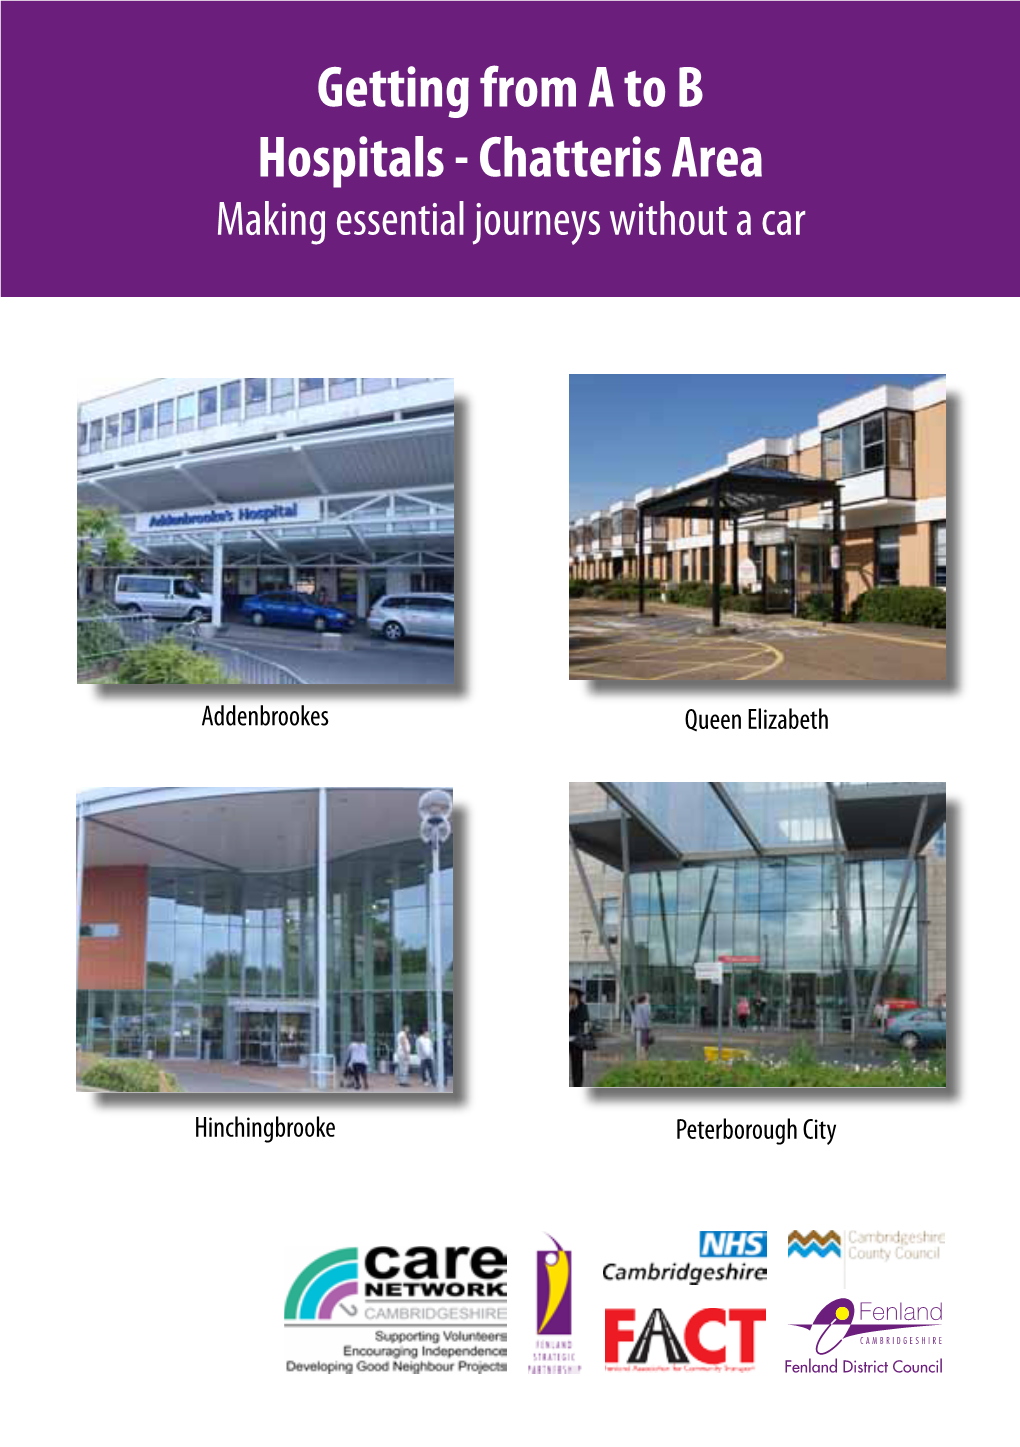 Getting from a to B Hospitals - Chatteris Area Making Essential Journeys Without a Car